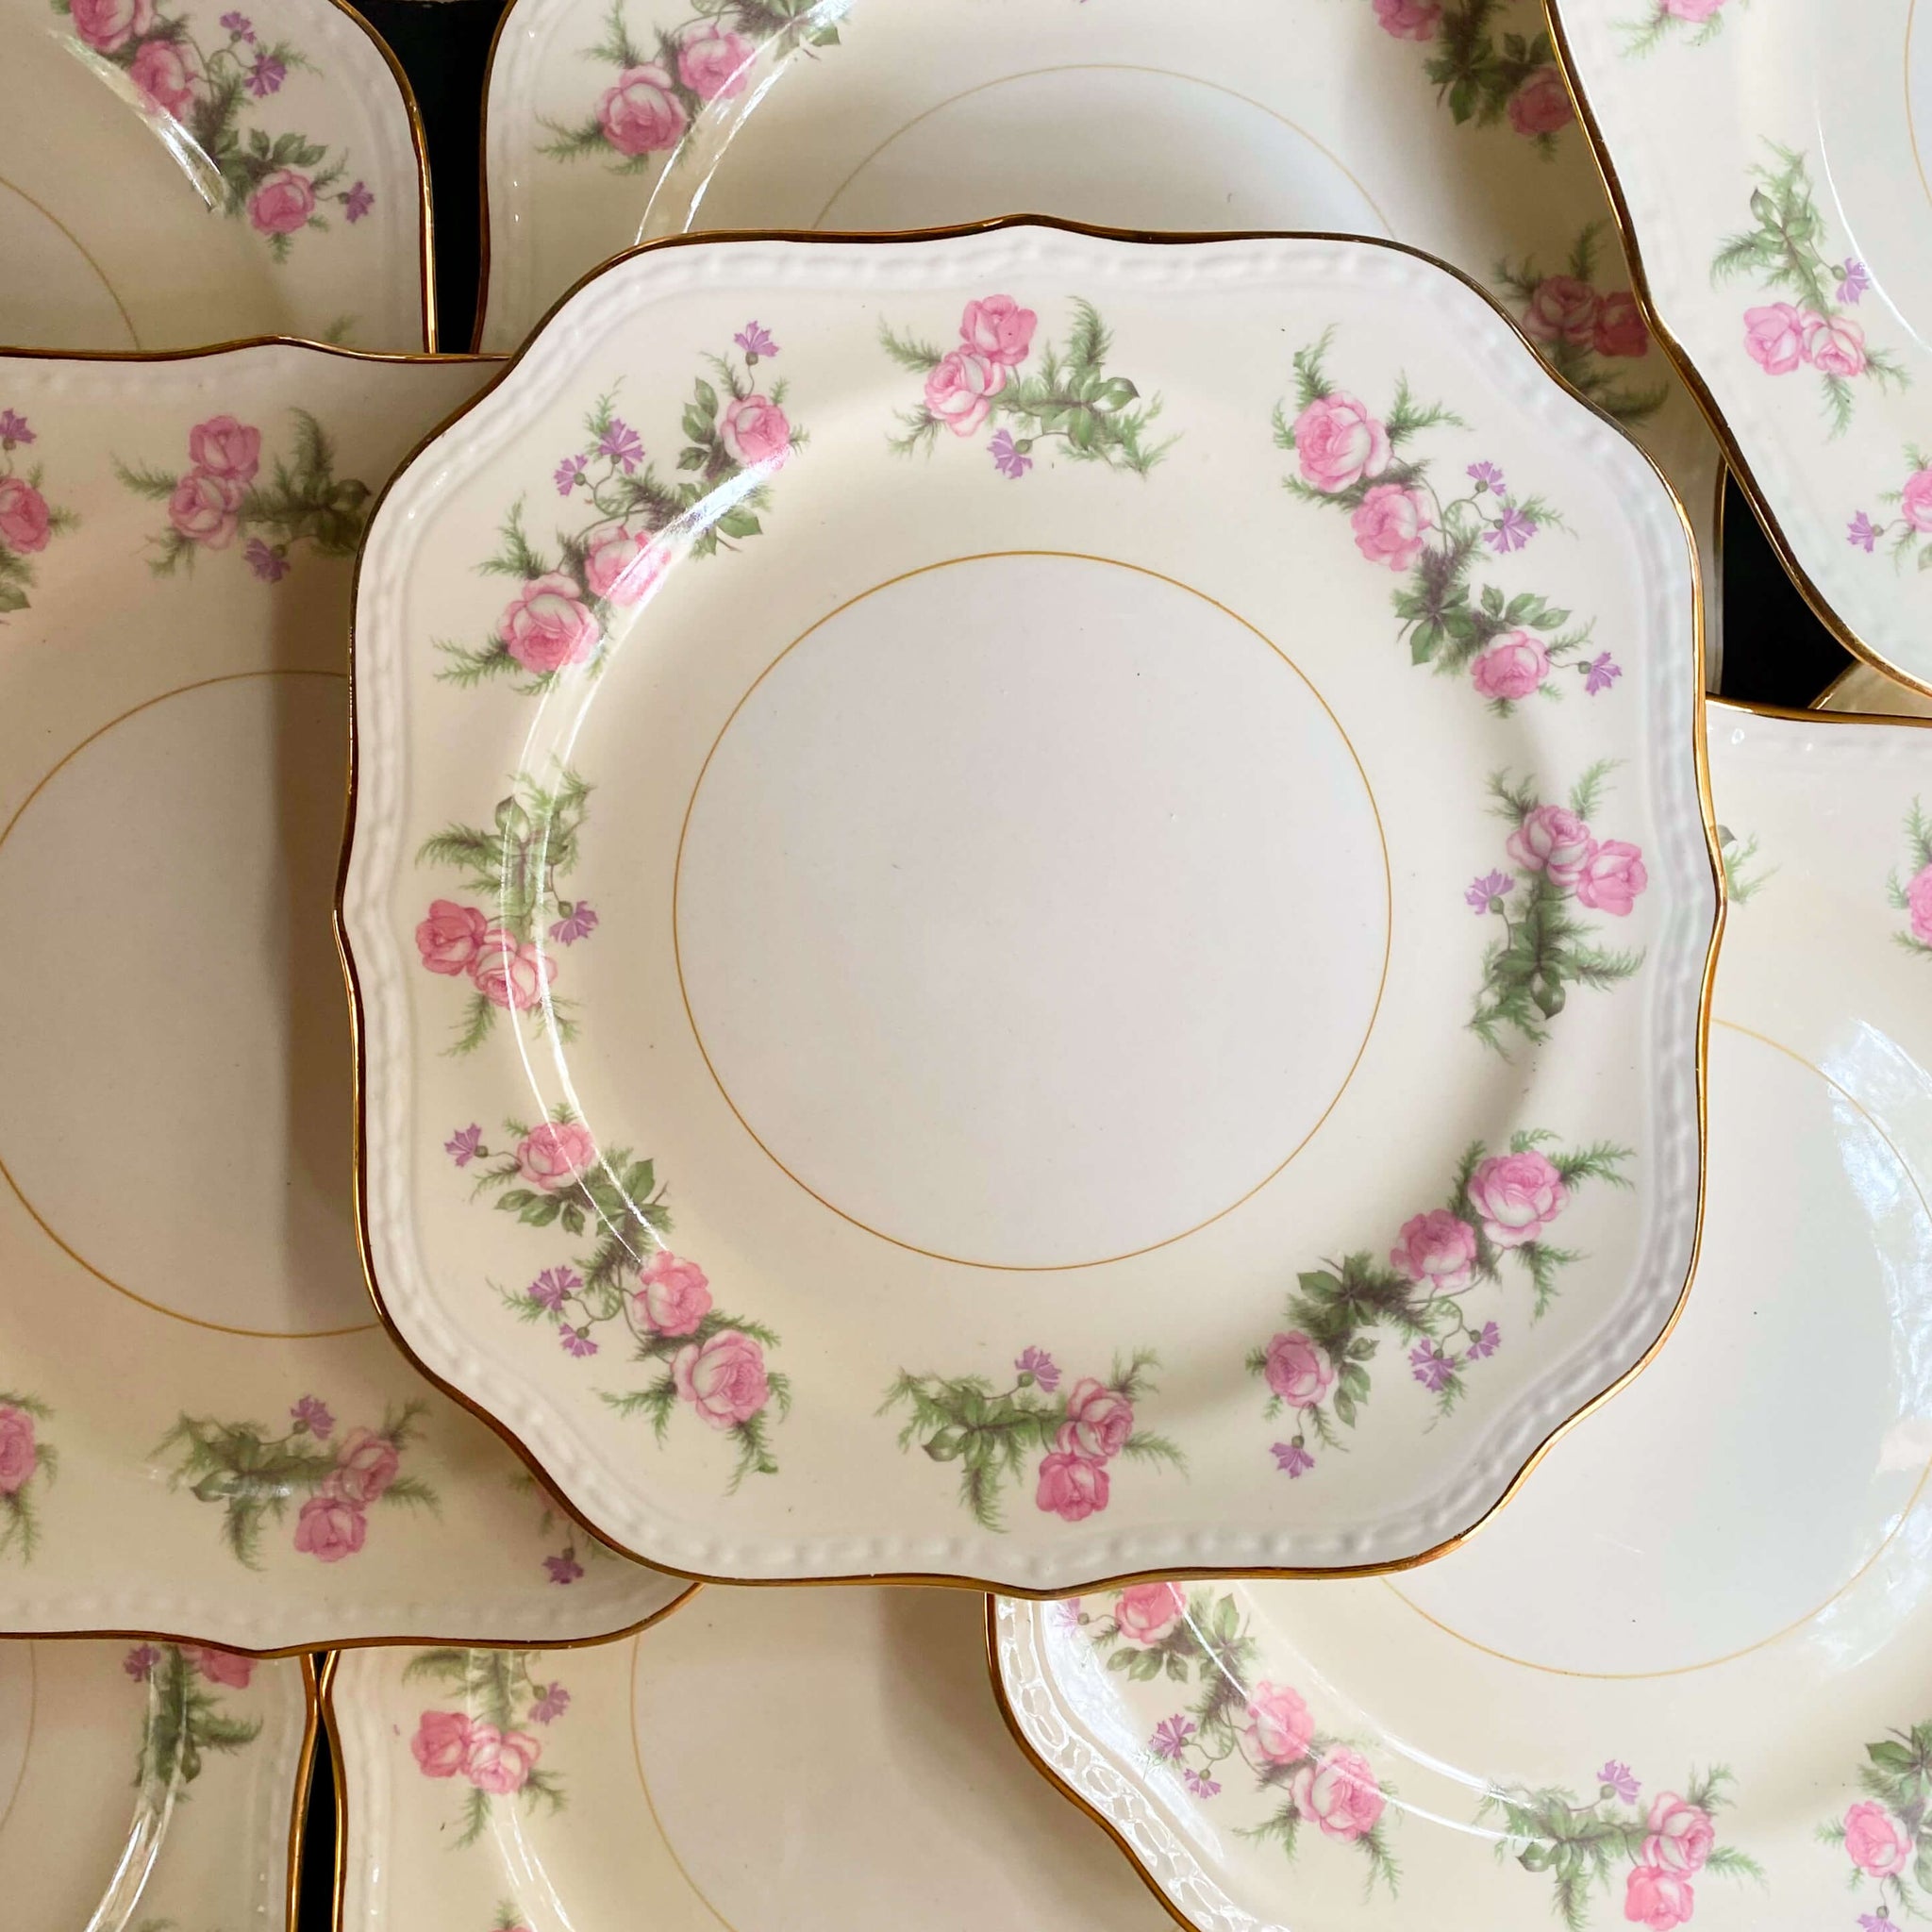 Vintage 1940s Square Salad Plates - Heather Rose Georgian Eggshell by Homer Laughlin circa 1947- Nine Available